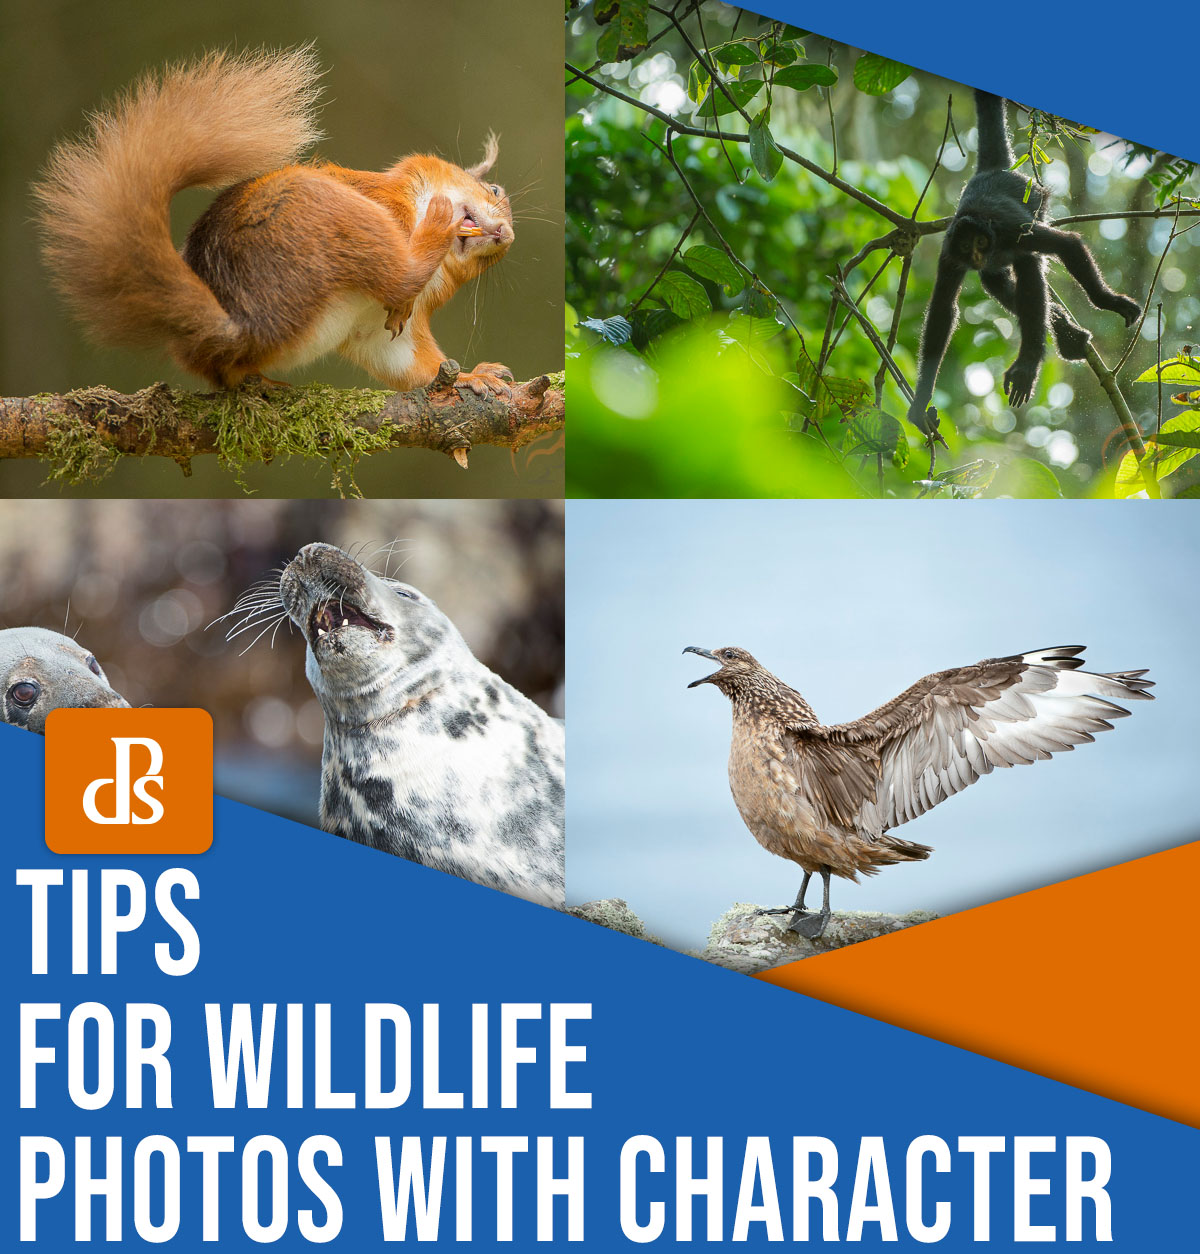 Tips for wildlife photos with character